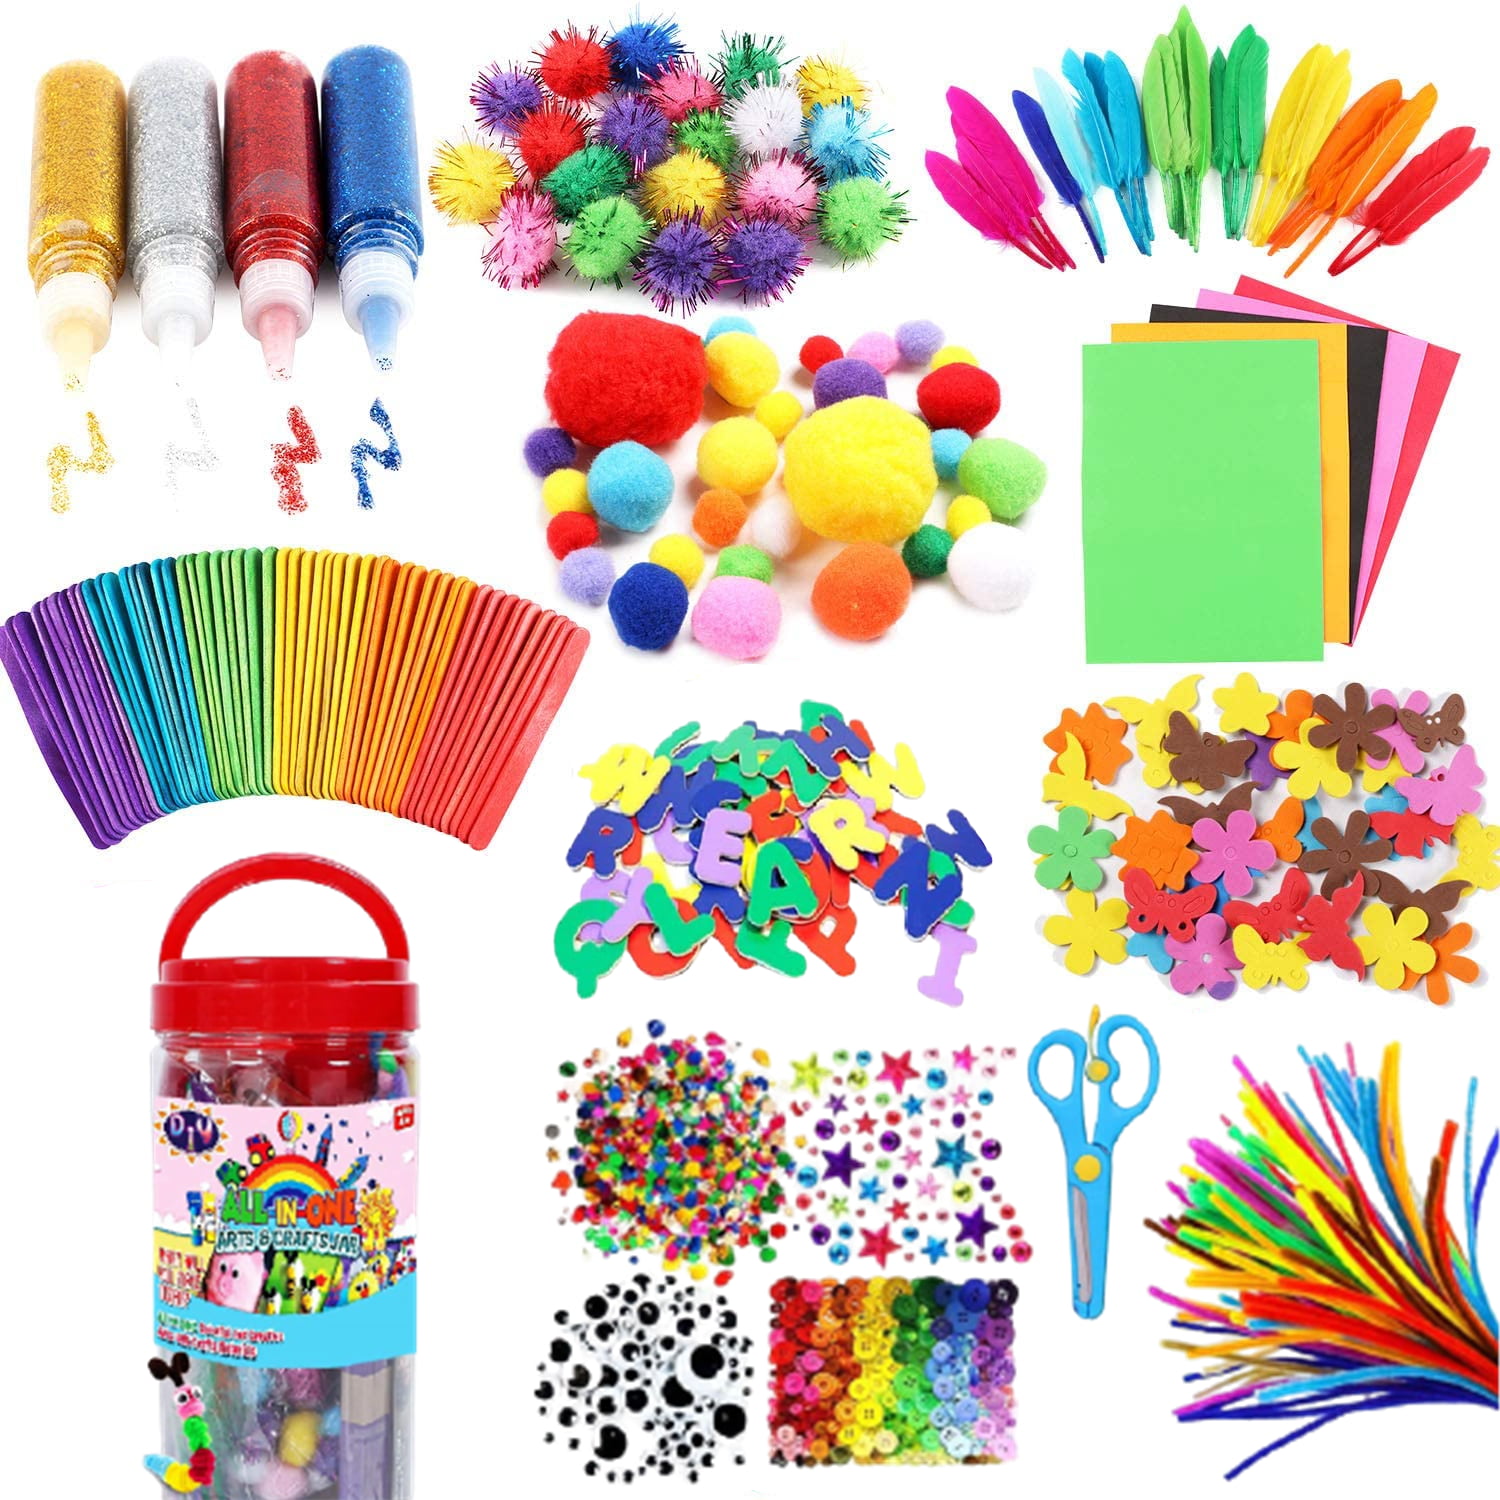 Creativity Craft Chenille Pipe Cleaners 700 Pcs 5 Colors DIY Art and Crafts Creative Projects and Decorations for Kids and Toddlers Smooth at Both Ends with 200 pcs 3 Sizes Wiggle Googly Eyes-Color2